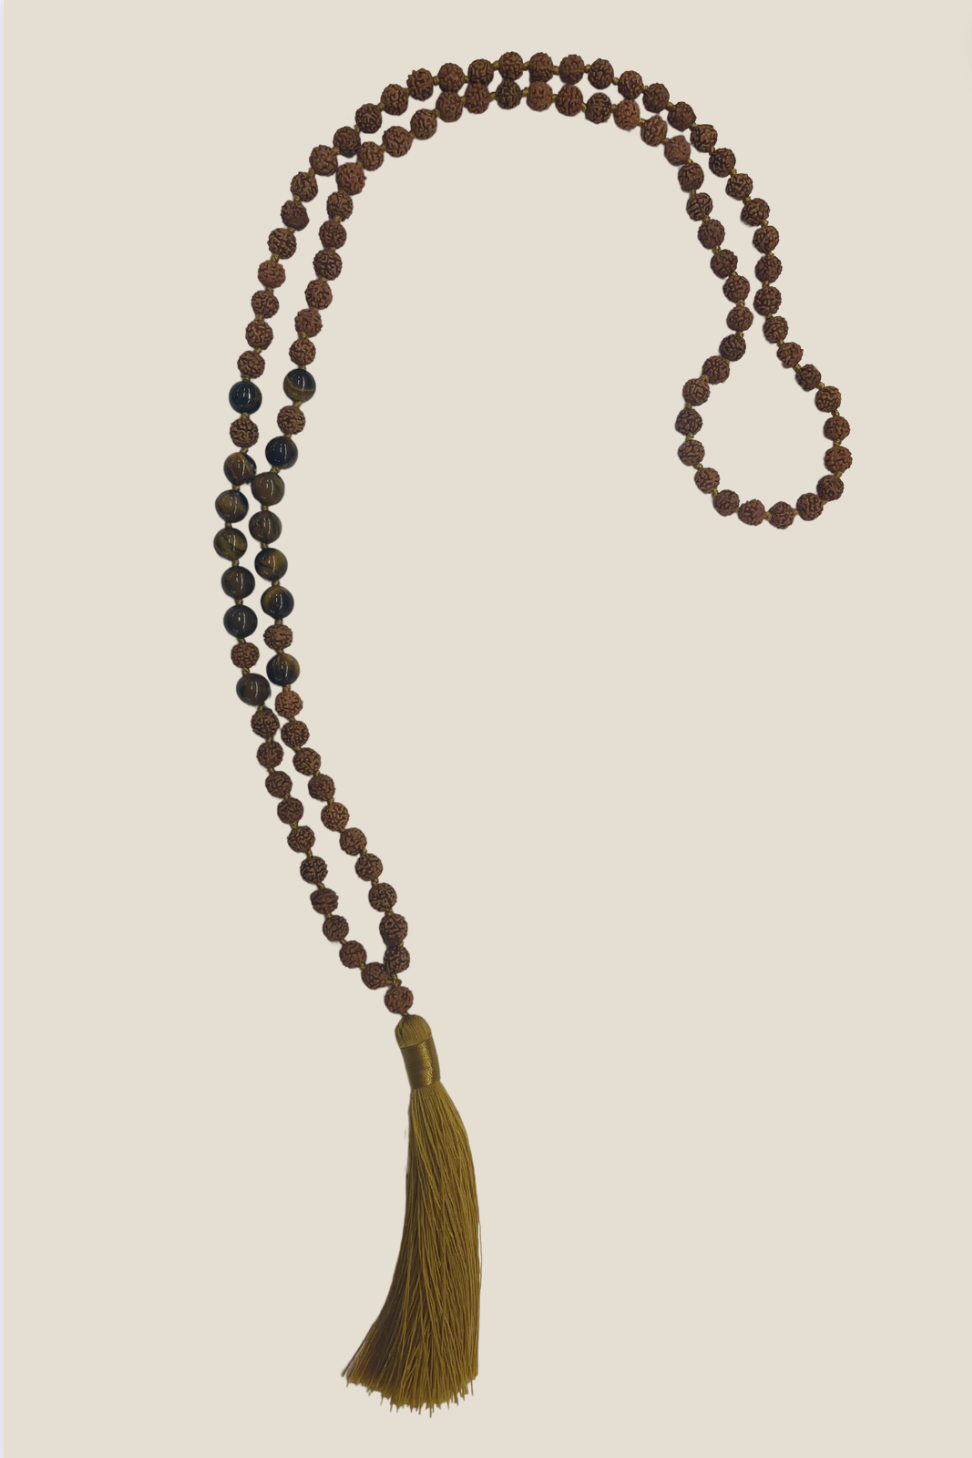 Urban Cachet Accessories Rudraksha Seed and Agate Necklace with Mustard Tassel #3